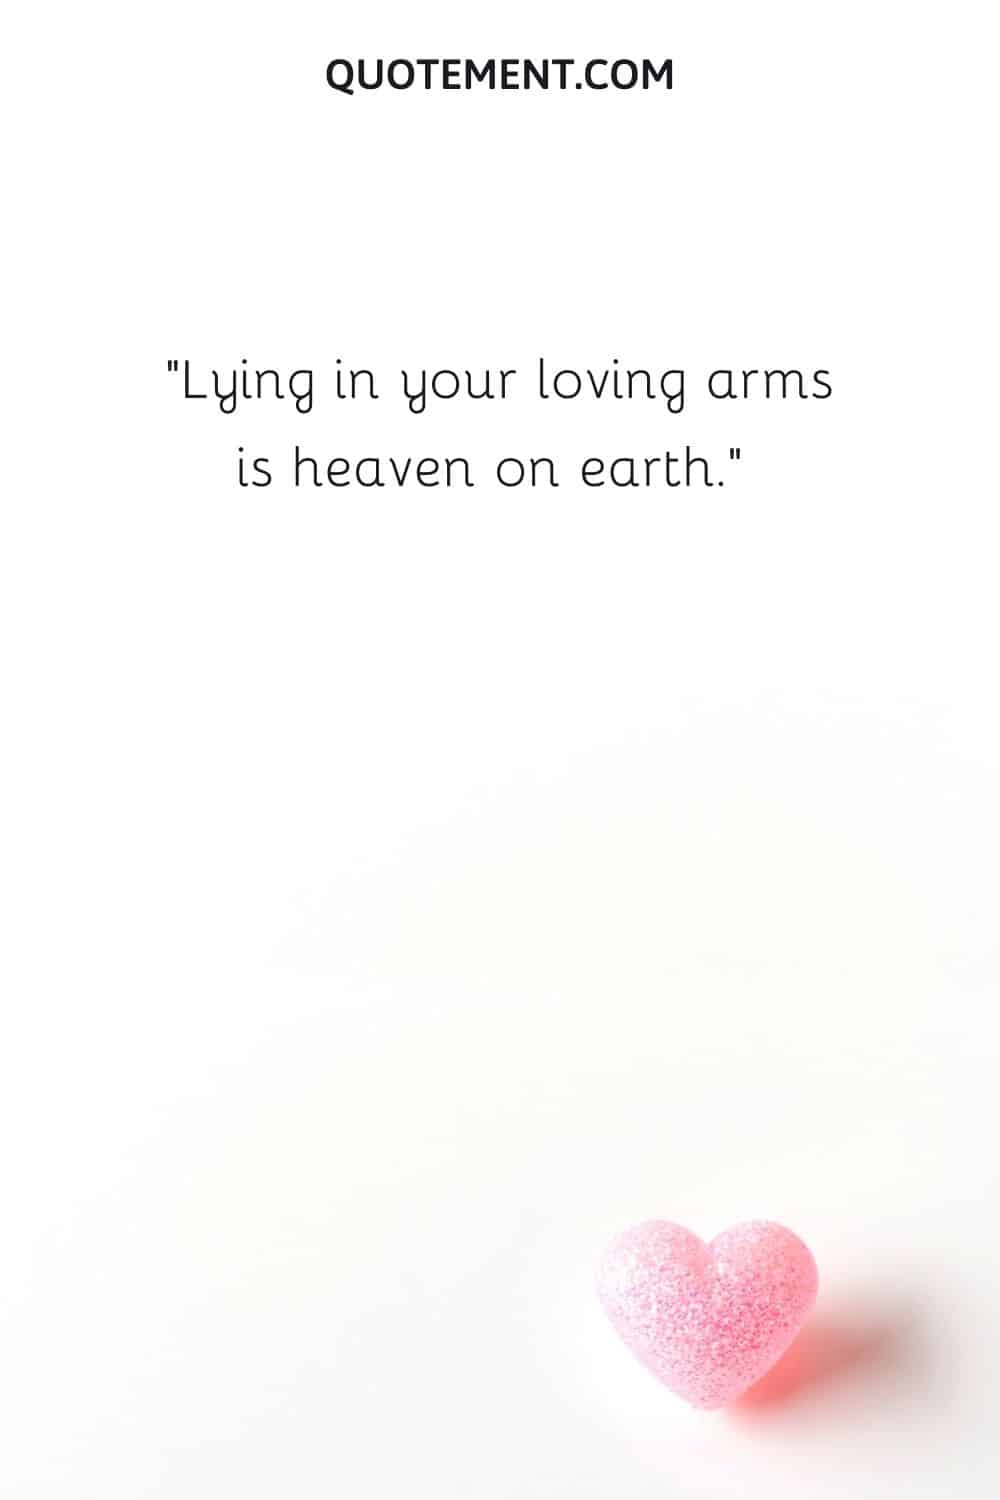 Lying in your loving arms is heaven on earth